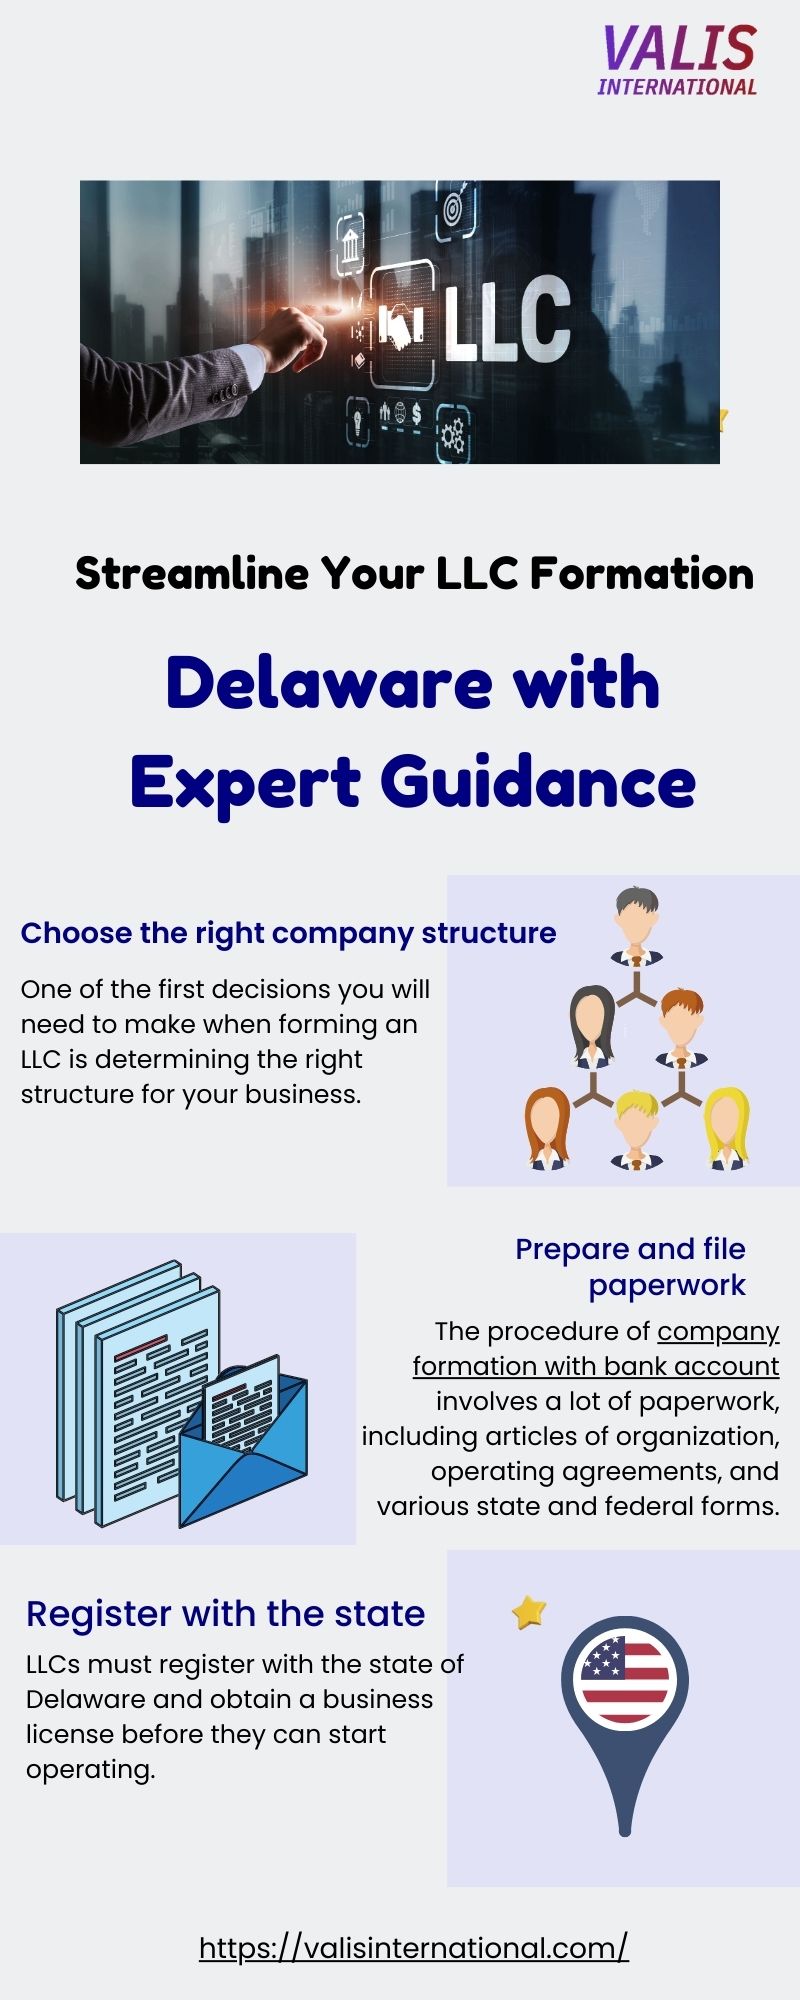 Streamline Your LLC Formation in Delaware with Expert Guidance